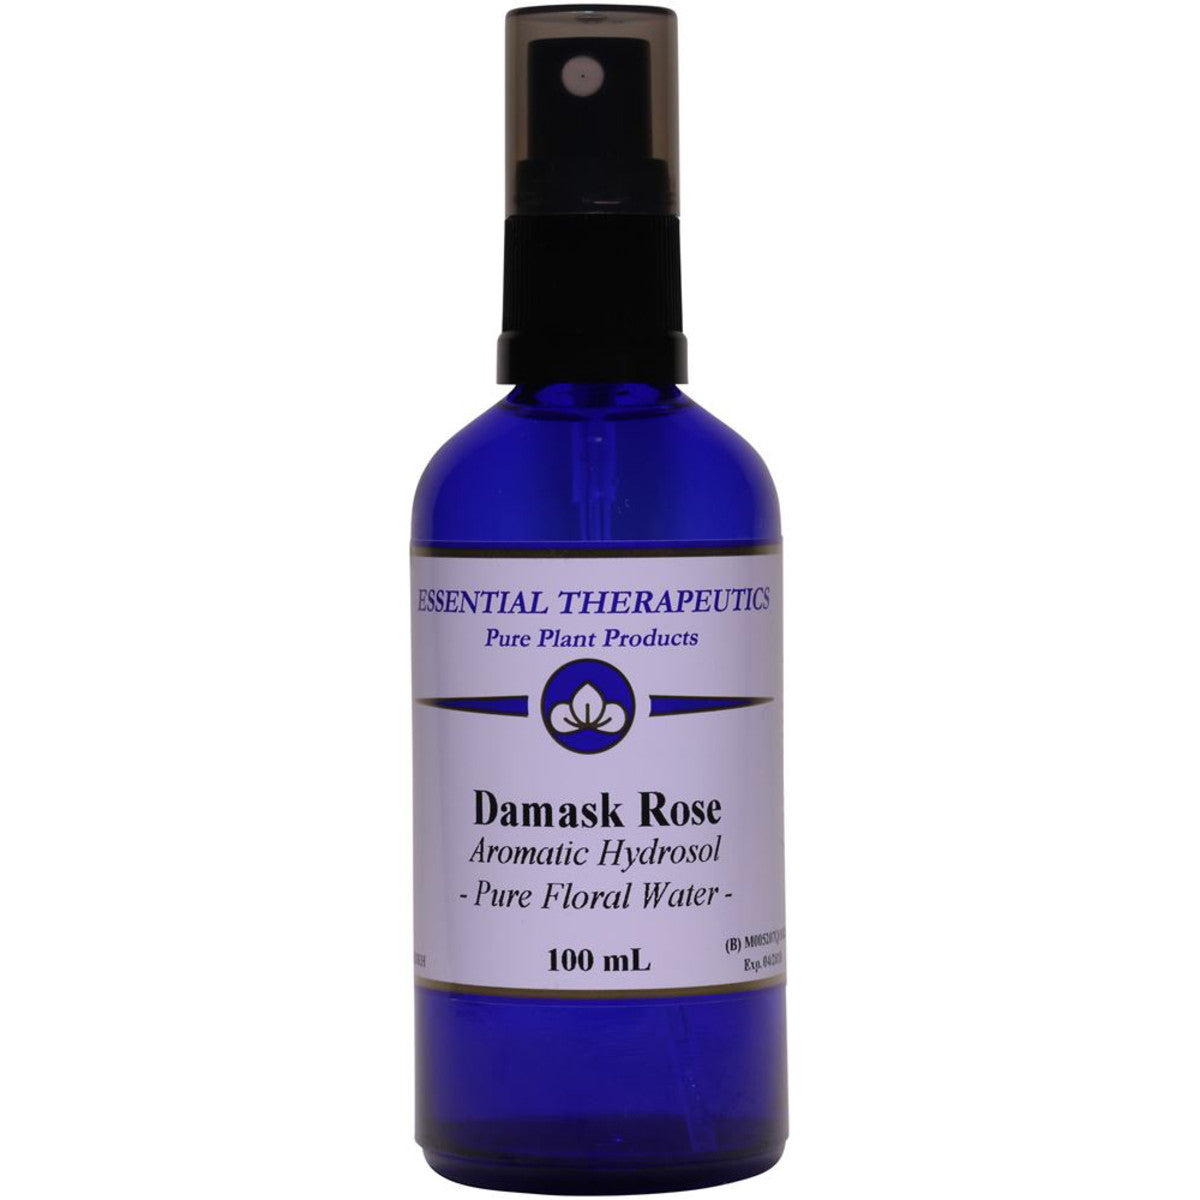 Essential Therapeutic - Aromatic Hydrosol Damask Rose